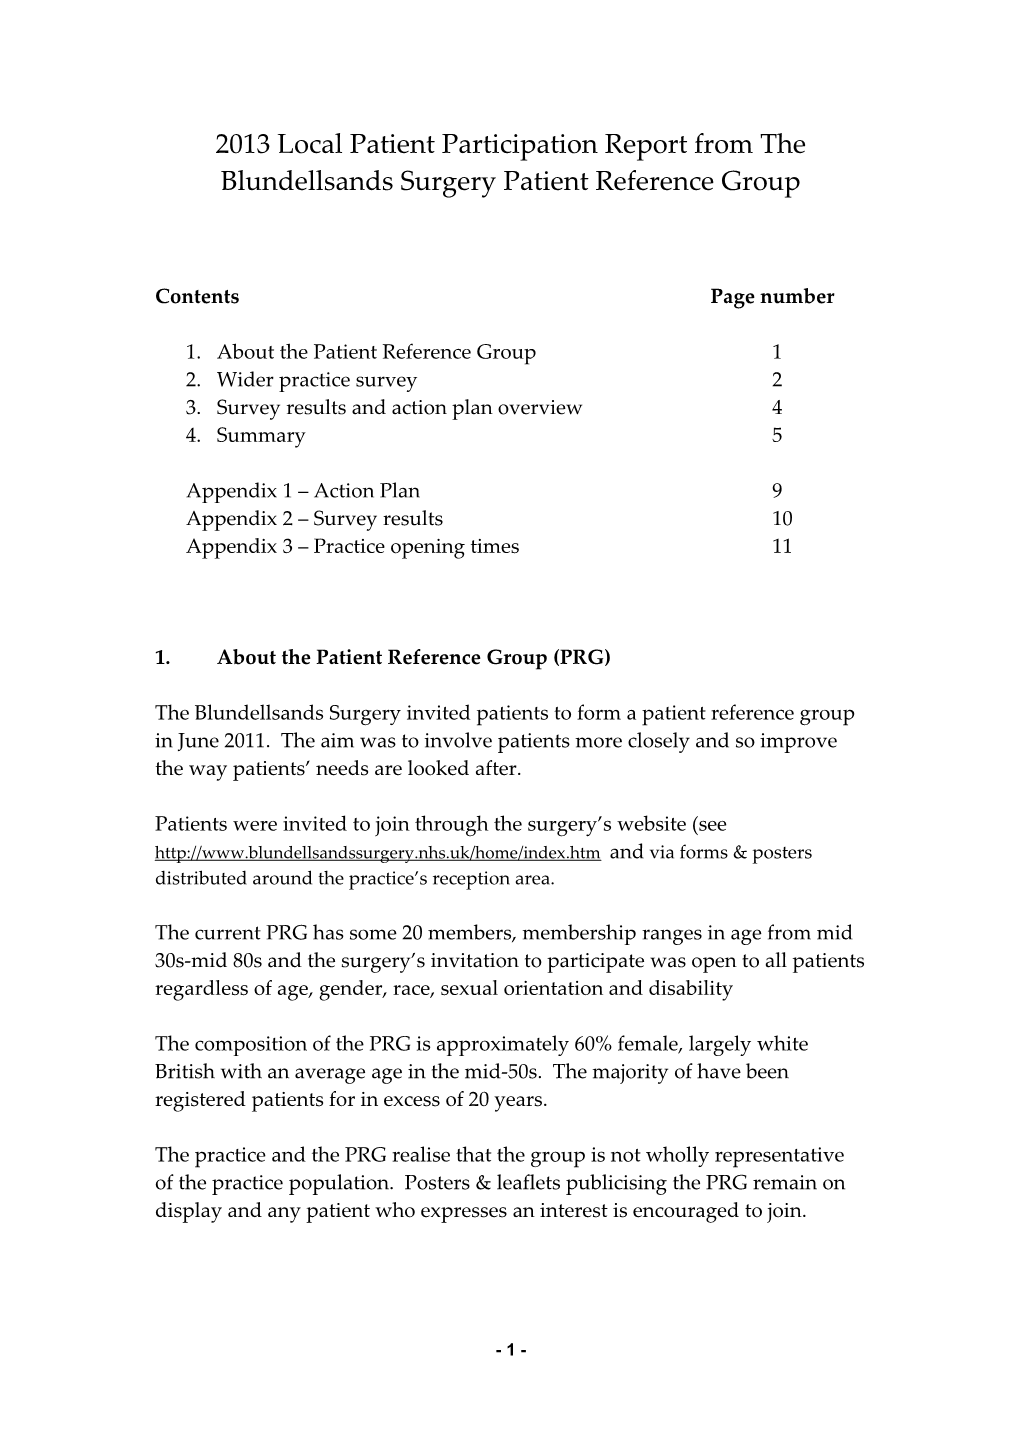 2012 Local Patient Participation Report from the X Practice Patient Reference Group